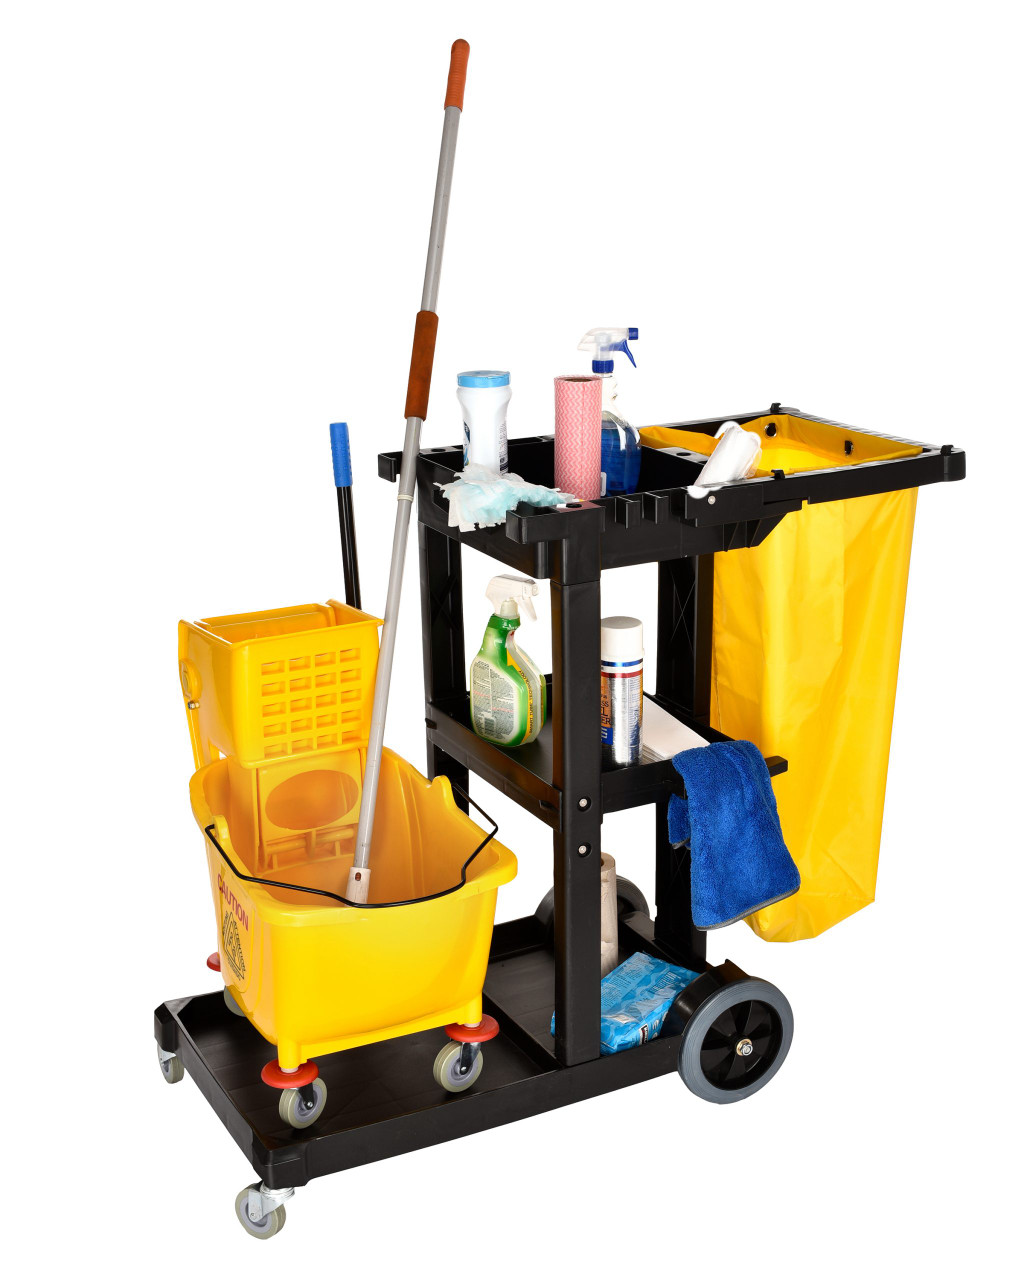 https://cdn1.bigcommerce.com/server4500/6b5e8/products/1449/images/2087/463-janitor-cart-C-scaled__07656.1602622919.1280.1280.jpg?c=2